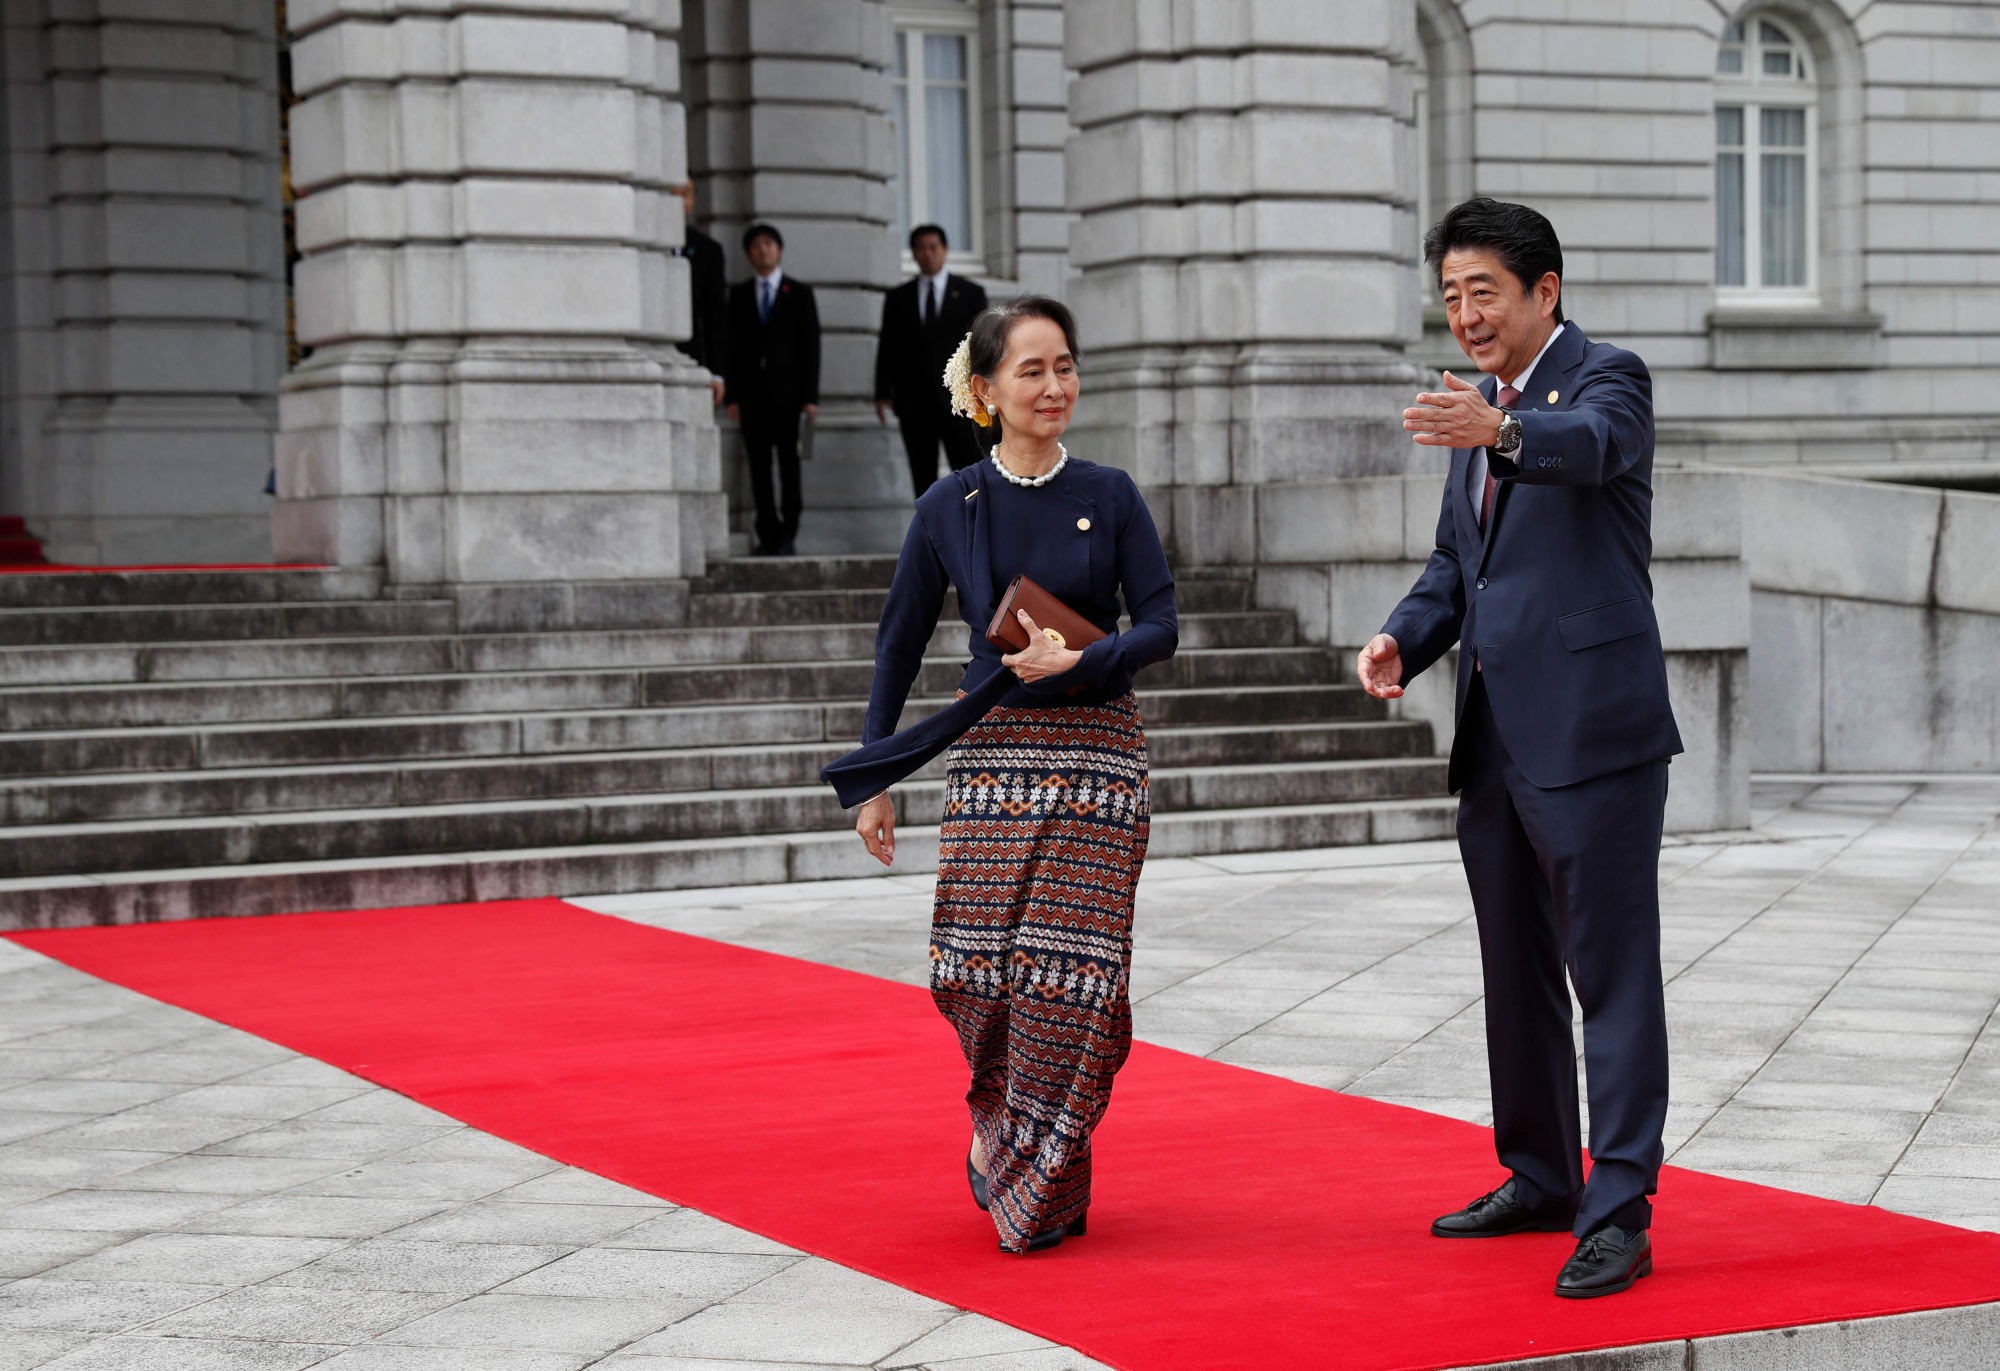 Prime Minister Shinzo Abe welcomes Myanmar's leader Aung San Suu Kyi as she arrives at the State Guesthouse in Tokyo on Tuesday for the 10th Mekong-Japan Summit. | AFP-JIJI